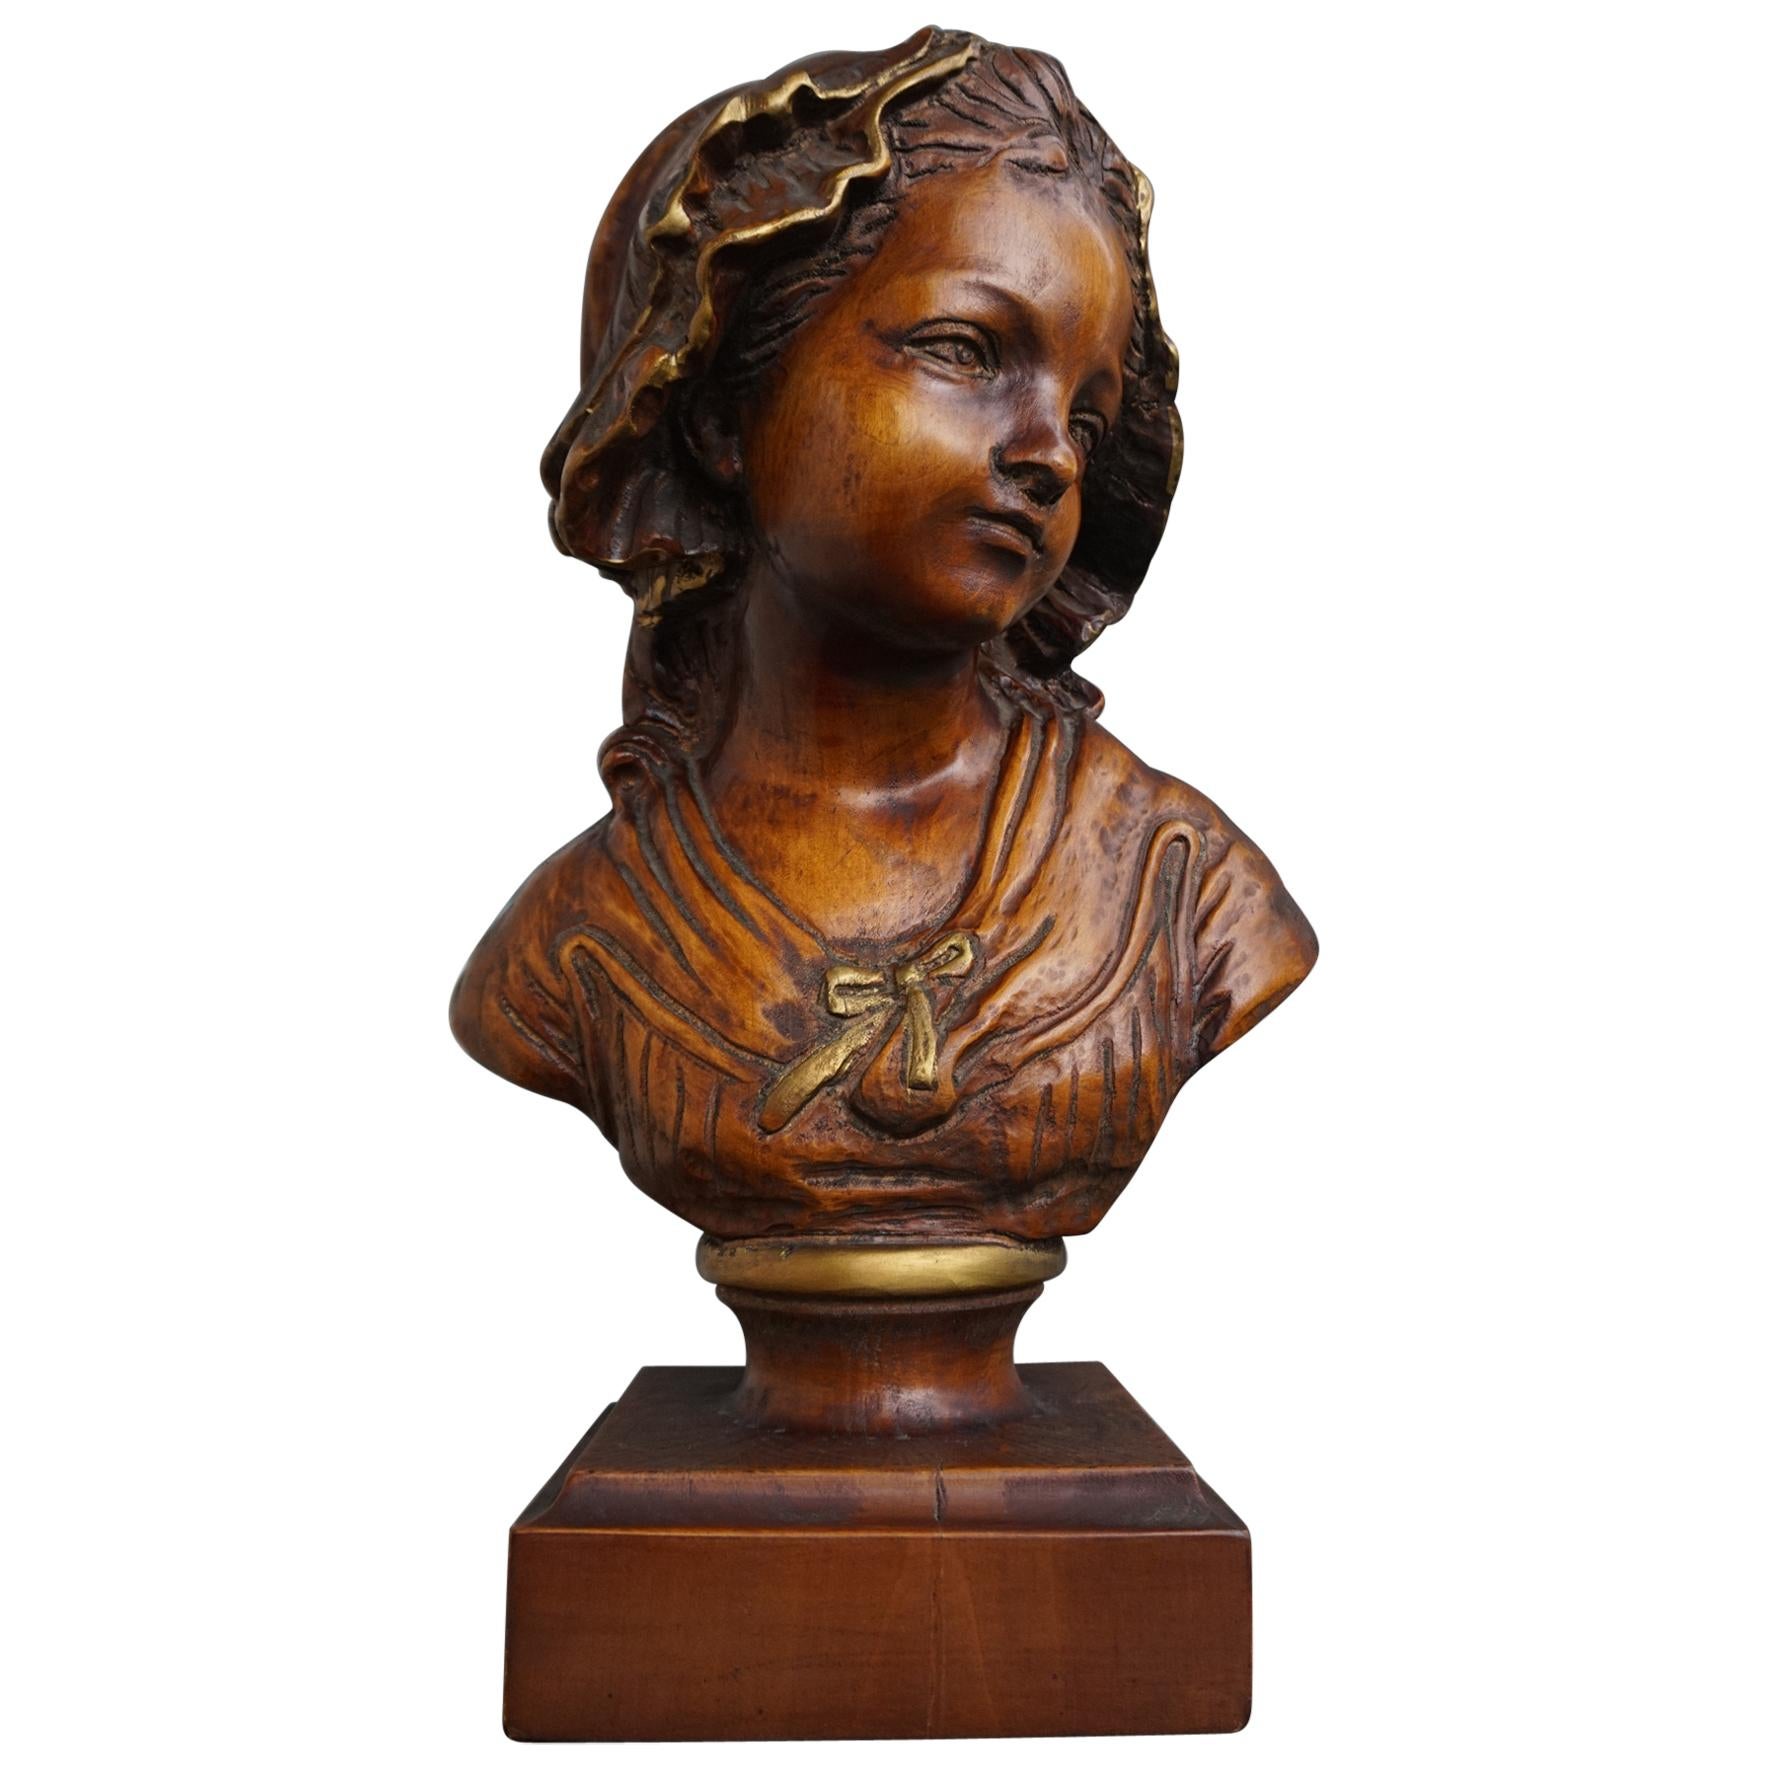 All Hand Carved Arts & Crafts Era, Wooden Girl Sculpture with Amazing Patina